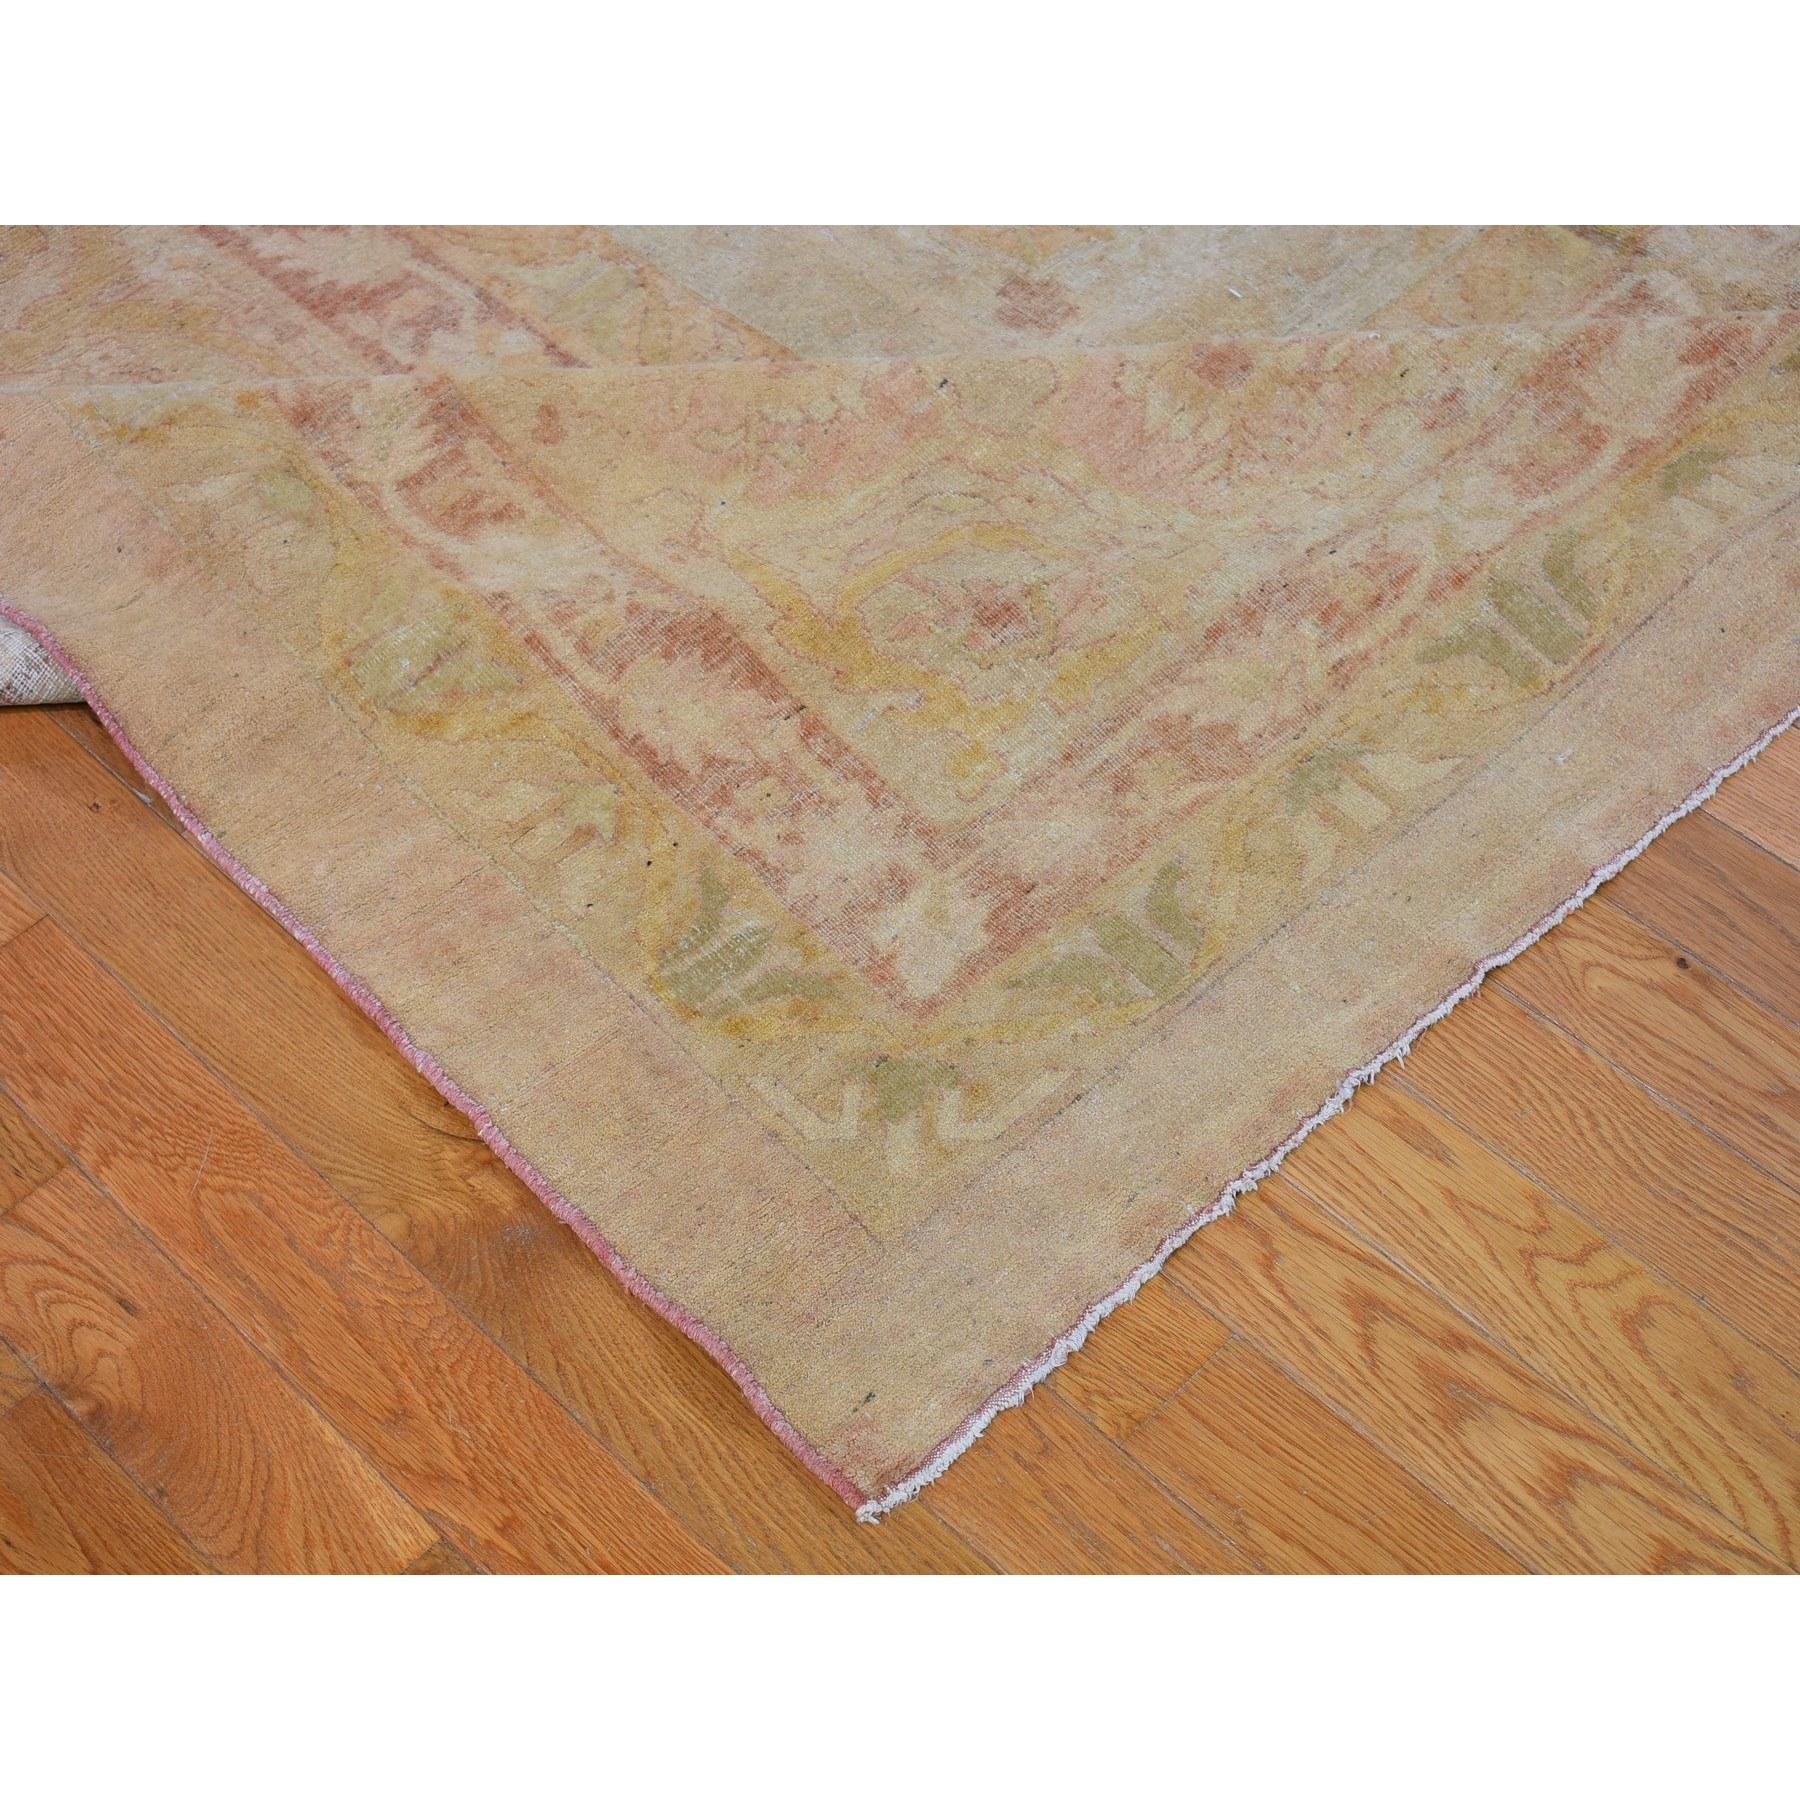 Oversized Antique Agra Good Cond Soft Colors Even Wear Pure Wool Handknotted Rug In Good Condition For Sale In Carlstadt, NJ